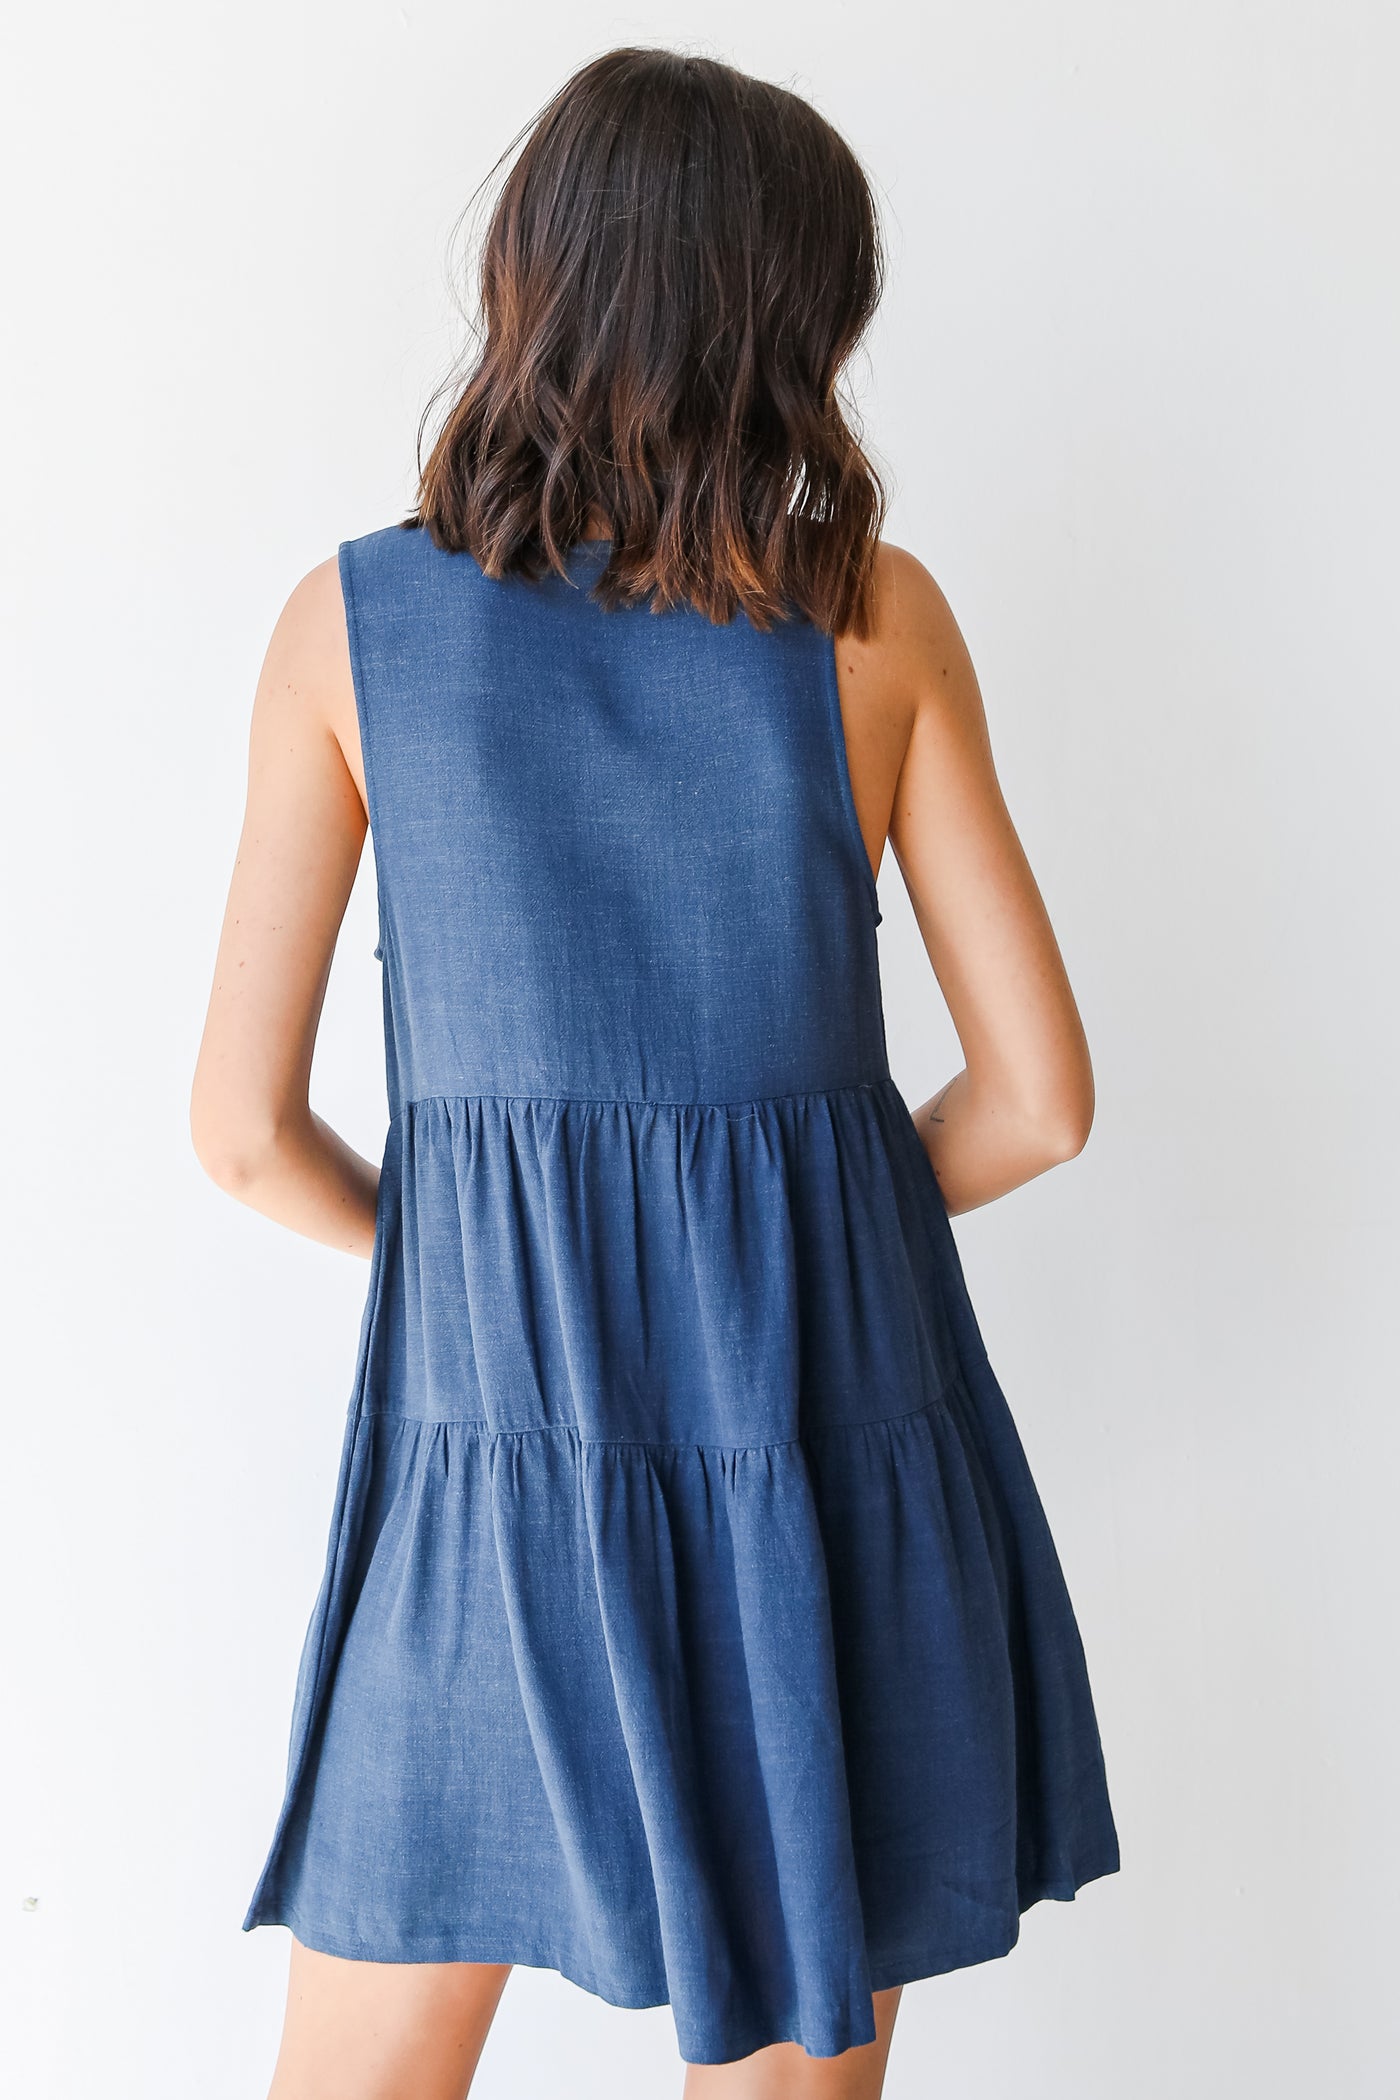 Linen Tiered Mini Dress in navy back view